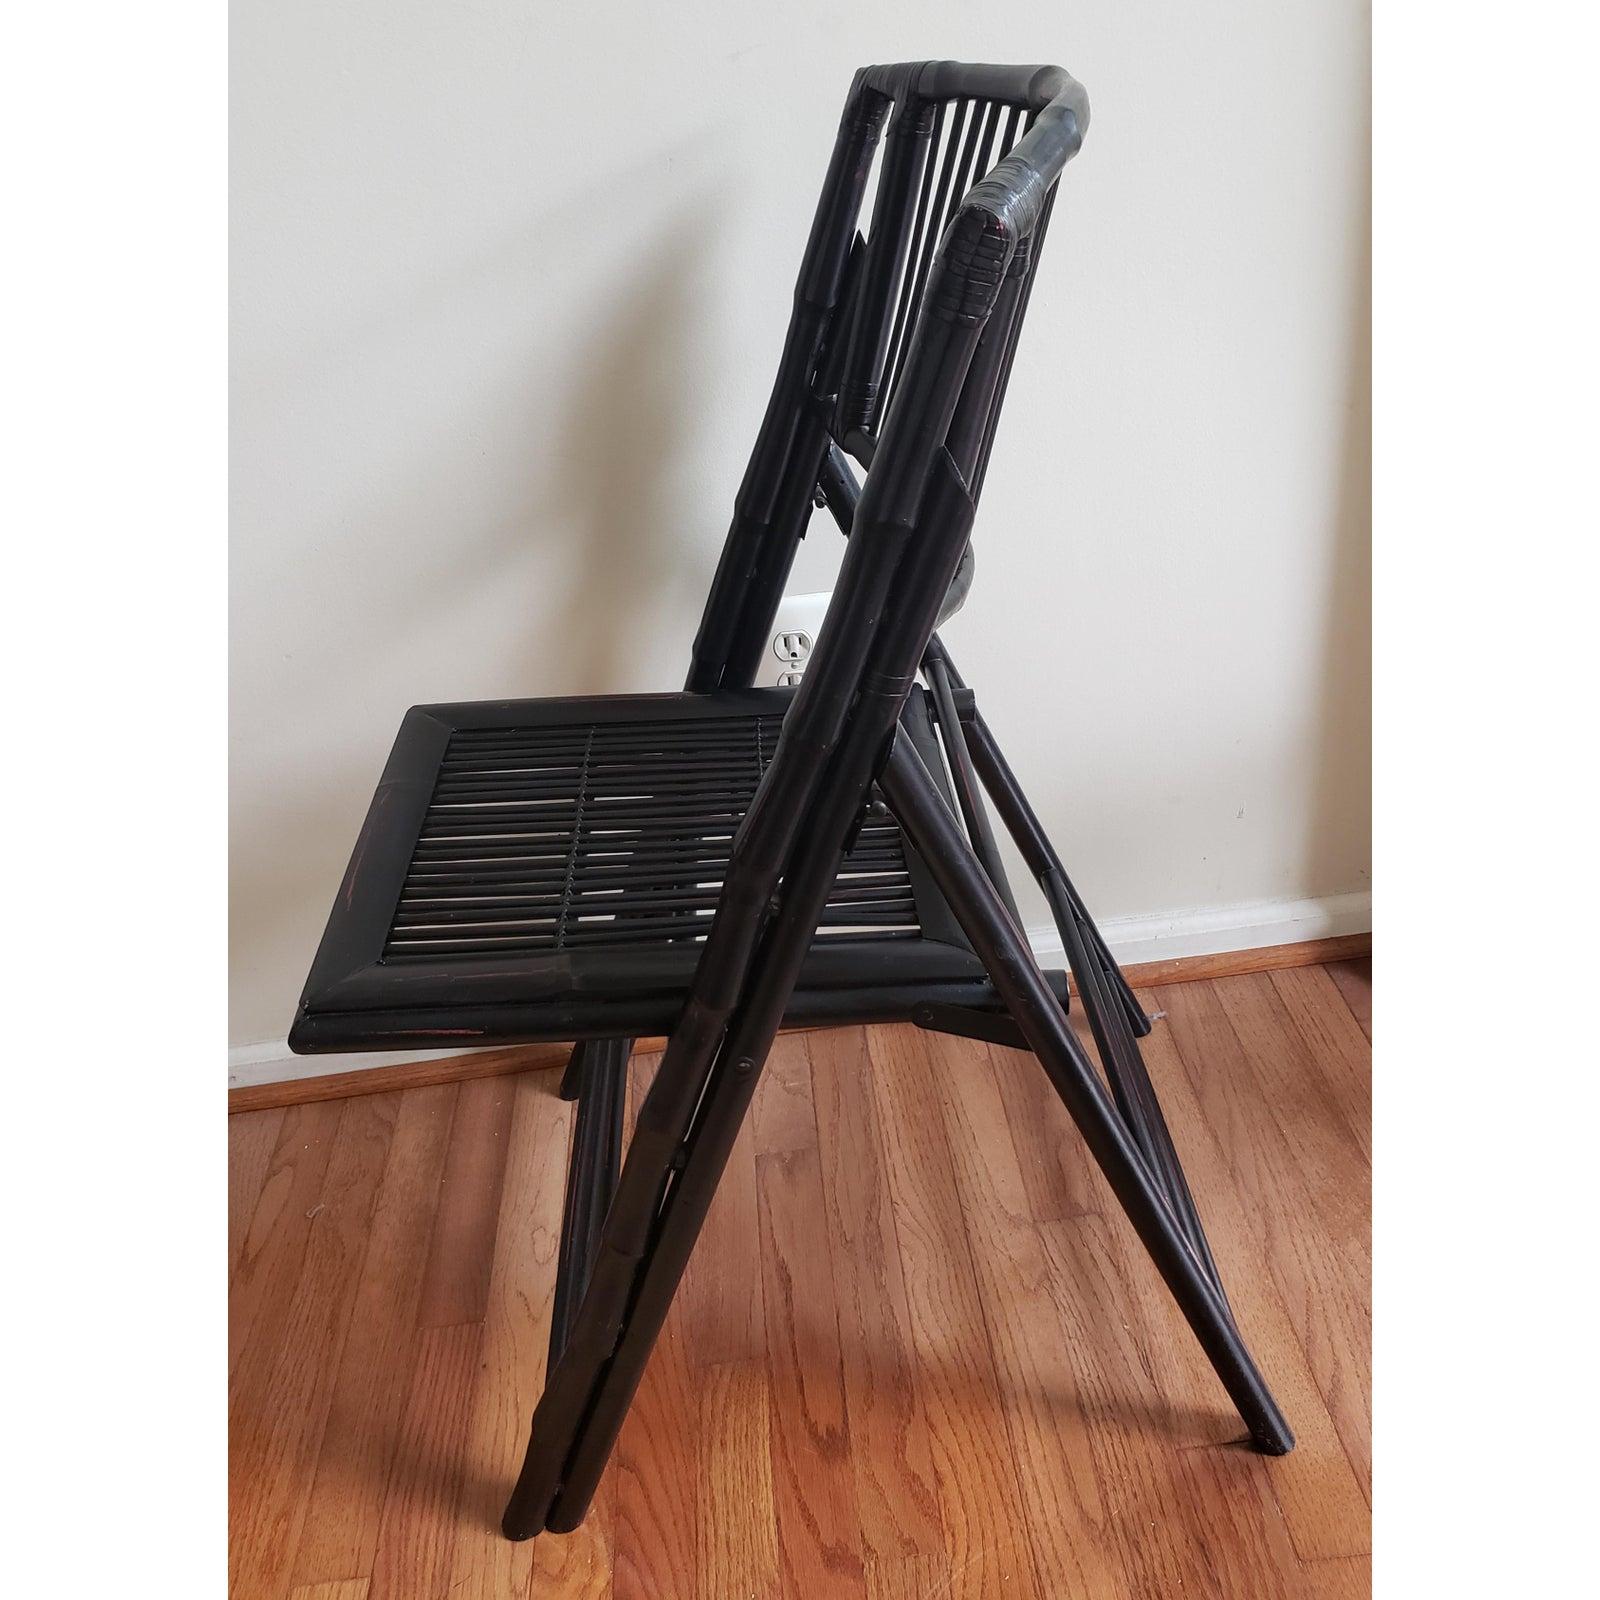 Wicker Vintage Bow Back Tortoise Bamboo Folding Chairs, a Pair For Sale